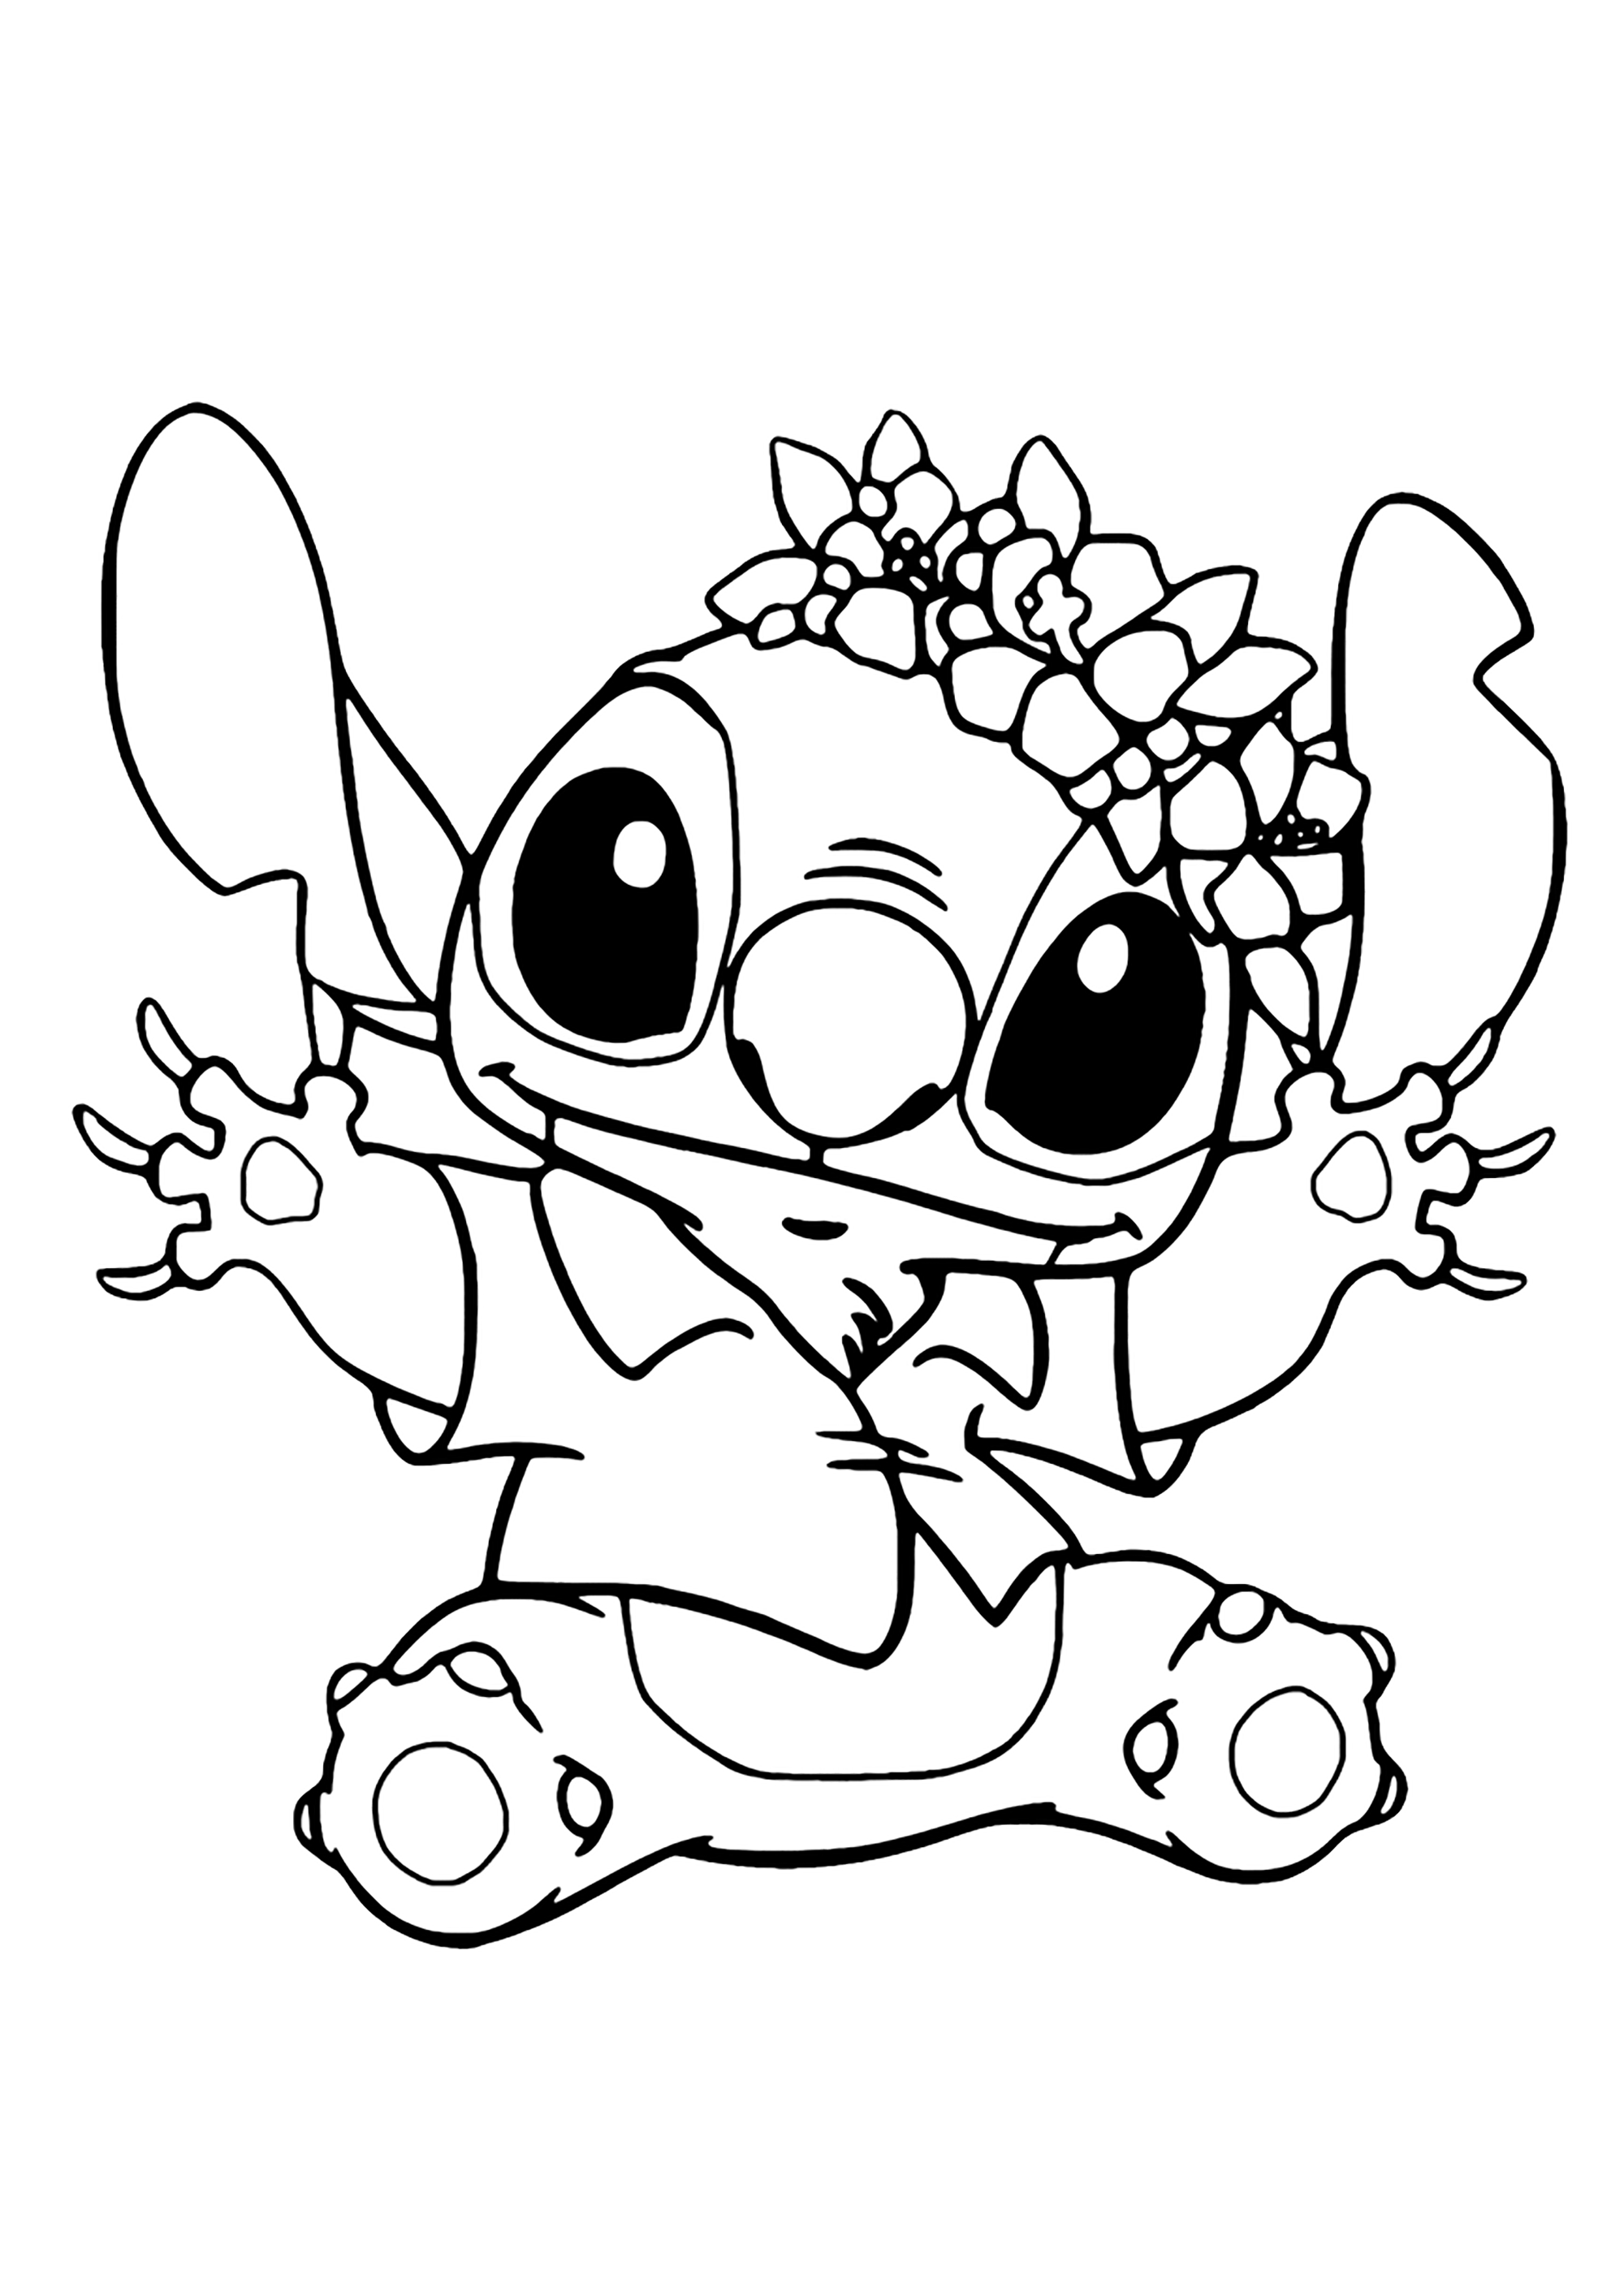 Lilo and stich coloring pages for children - Lilo And Stich Kids